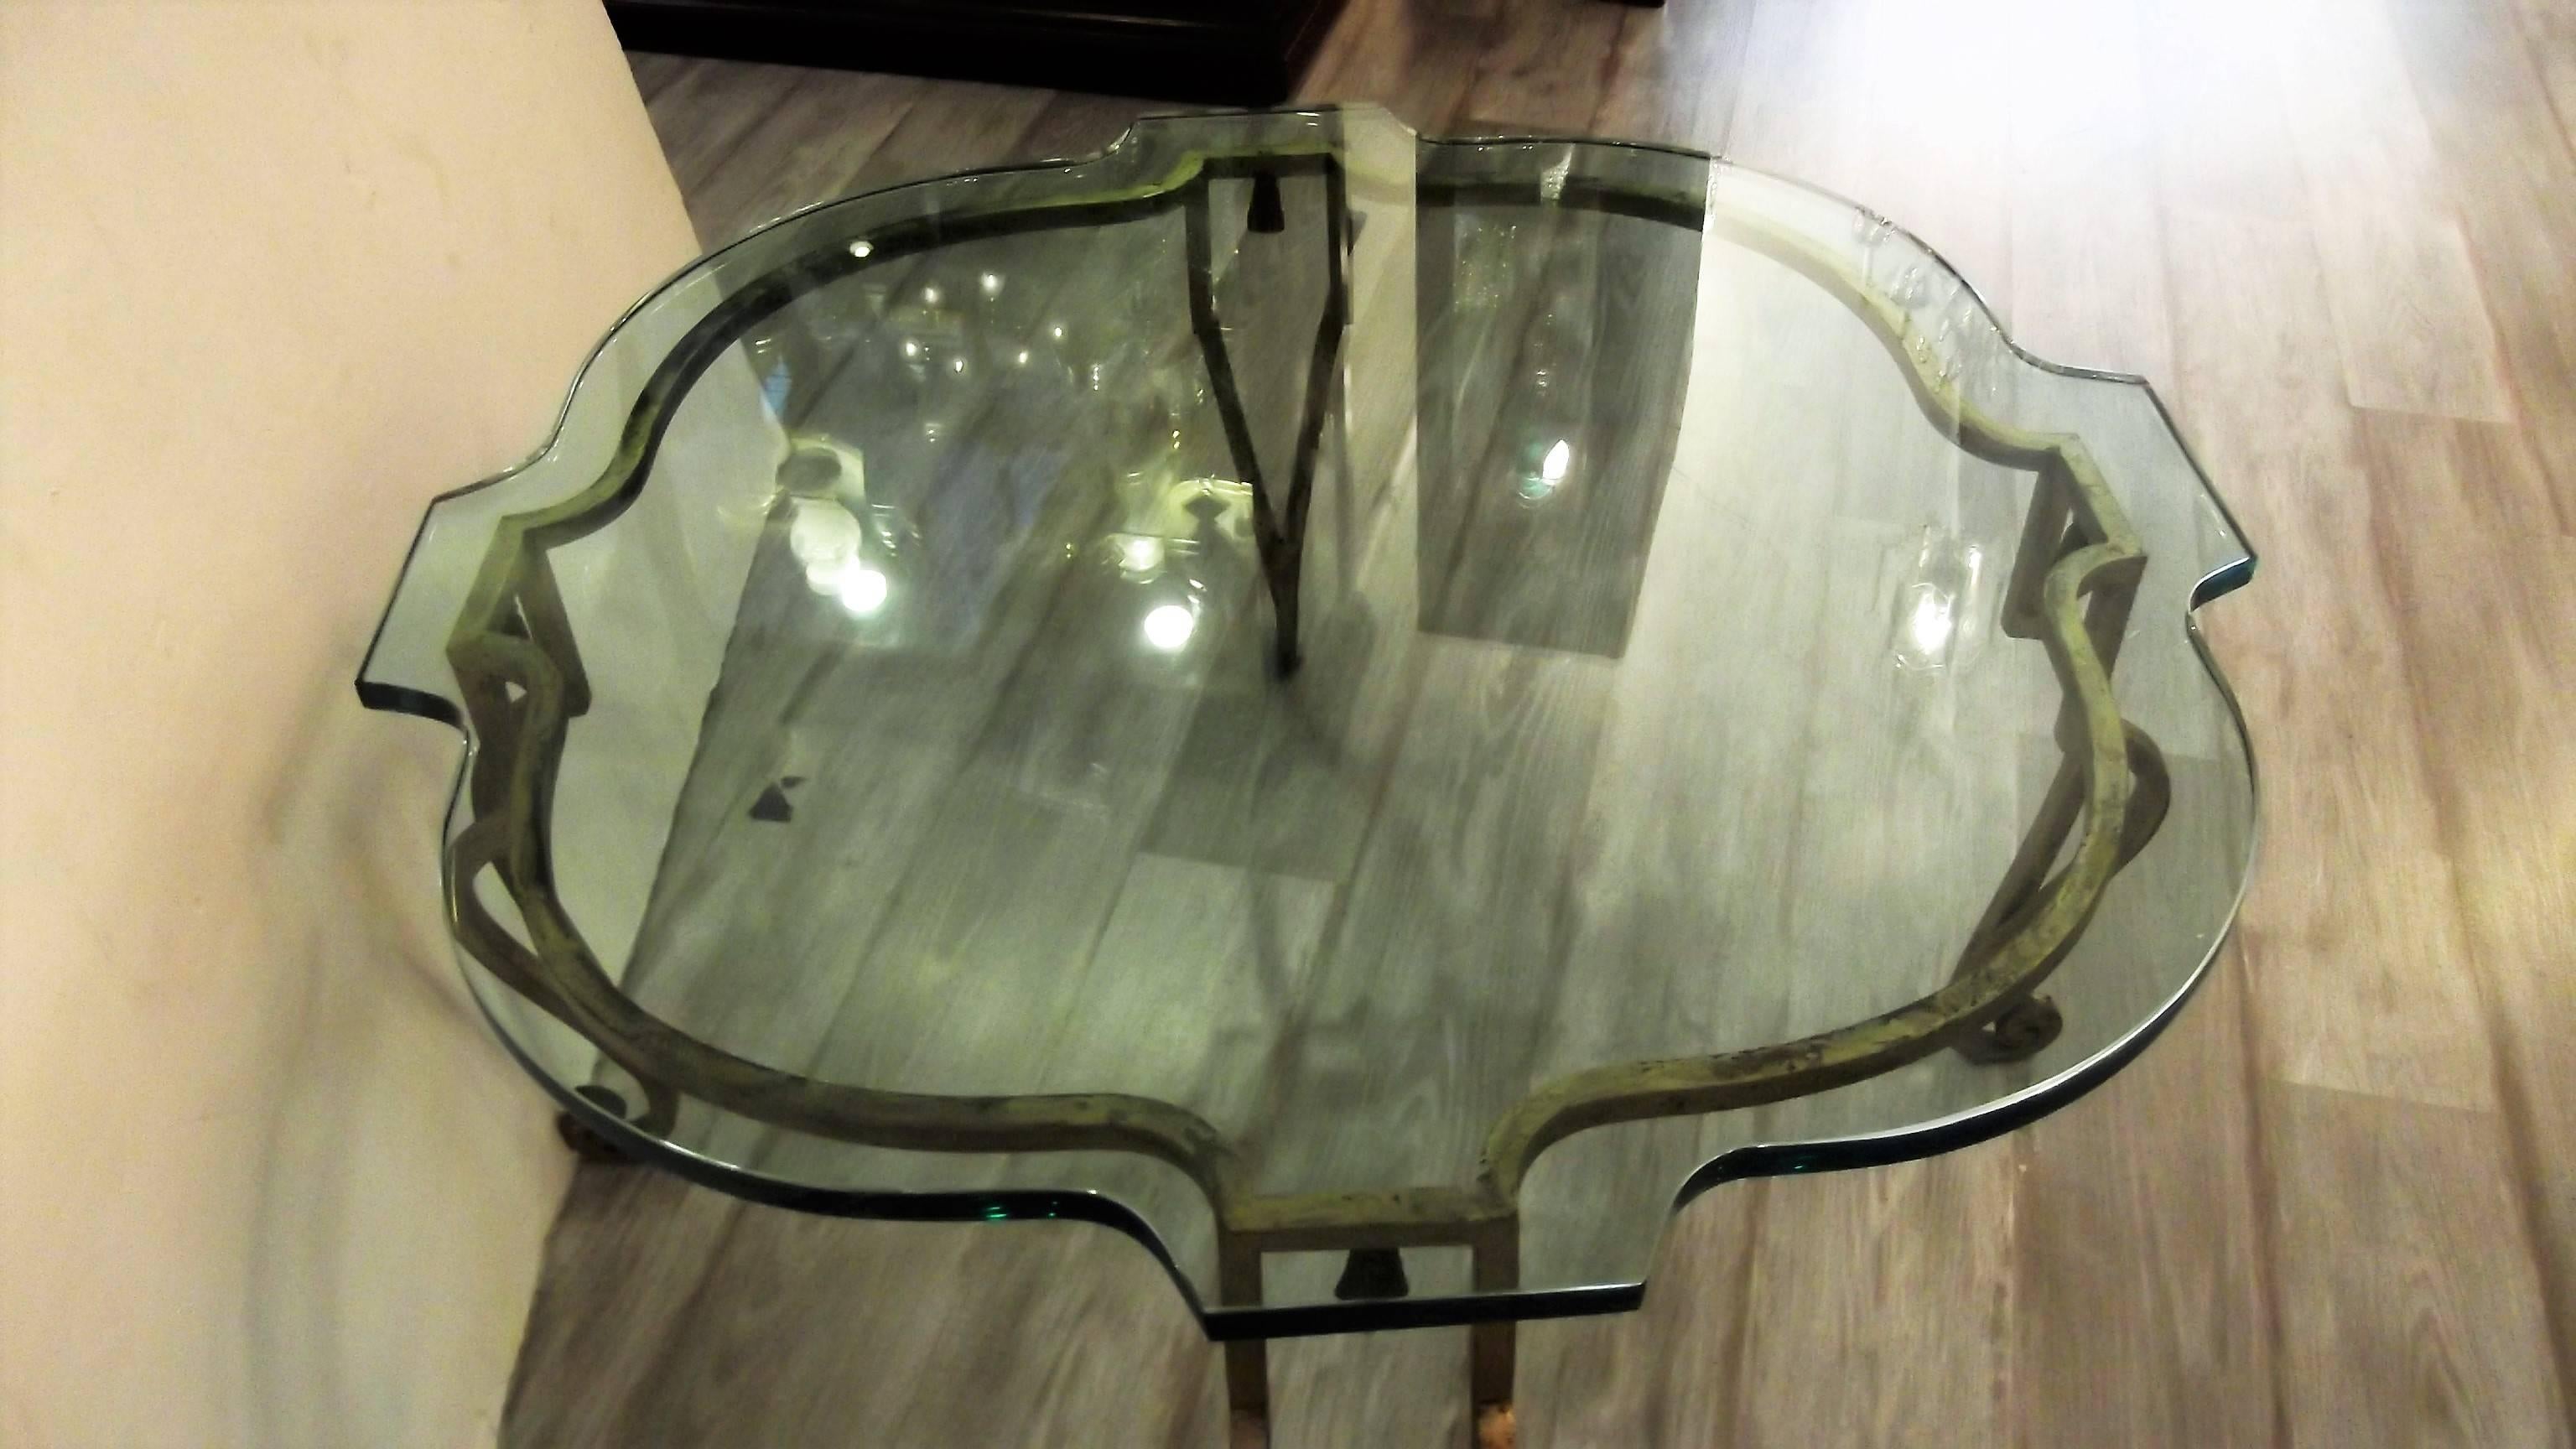 Elegant French glass and distressed gilt iron cocktail table attributed to Maison Ramsey. The custom scalloped top resting on a hand-forged shapely iron base with a worn gilt finished surface. Nice medium size with open and airy feel.
There are